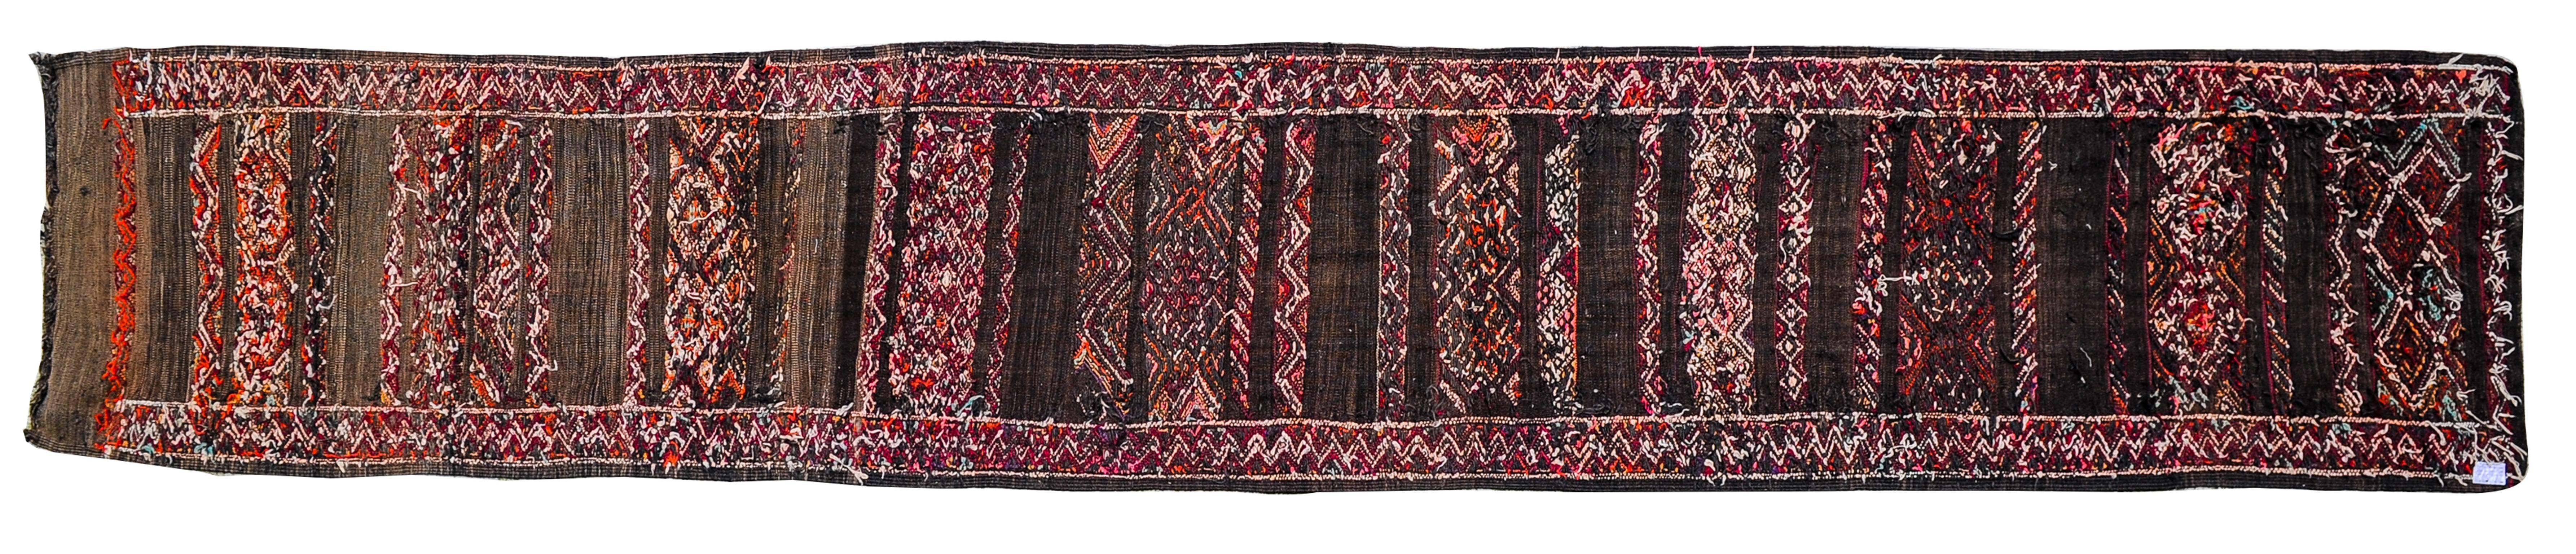 Vintage Moroccan Nomadic runner, very long, with geometrical archaic design.
The black color was used for wool by nomads to rest their eyes in the strong light of the desert sun.
These rugs are used in the Berber tents, light for easy travel for